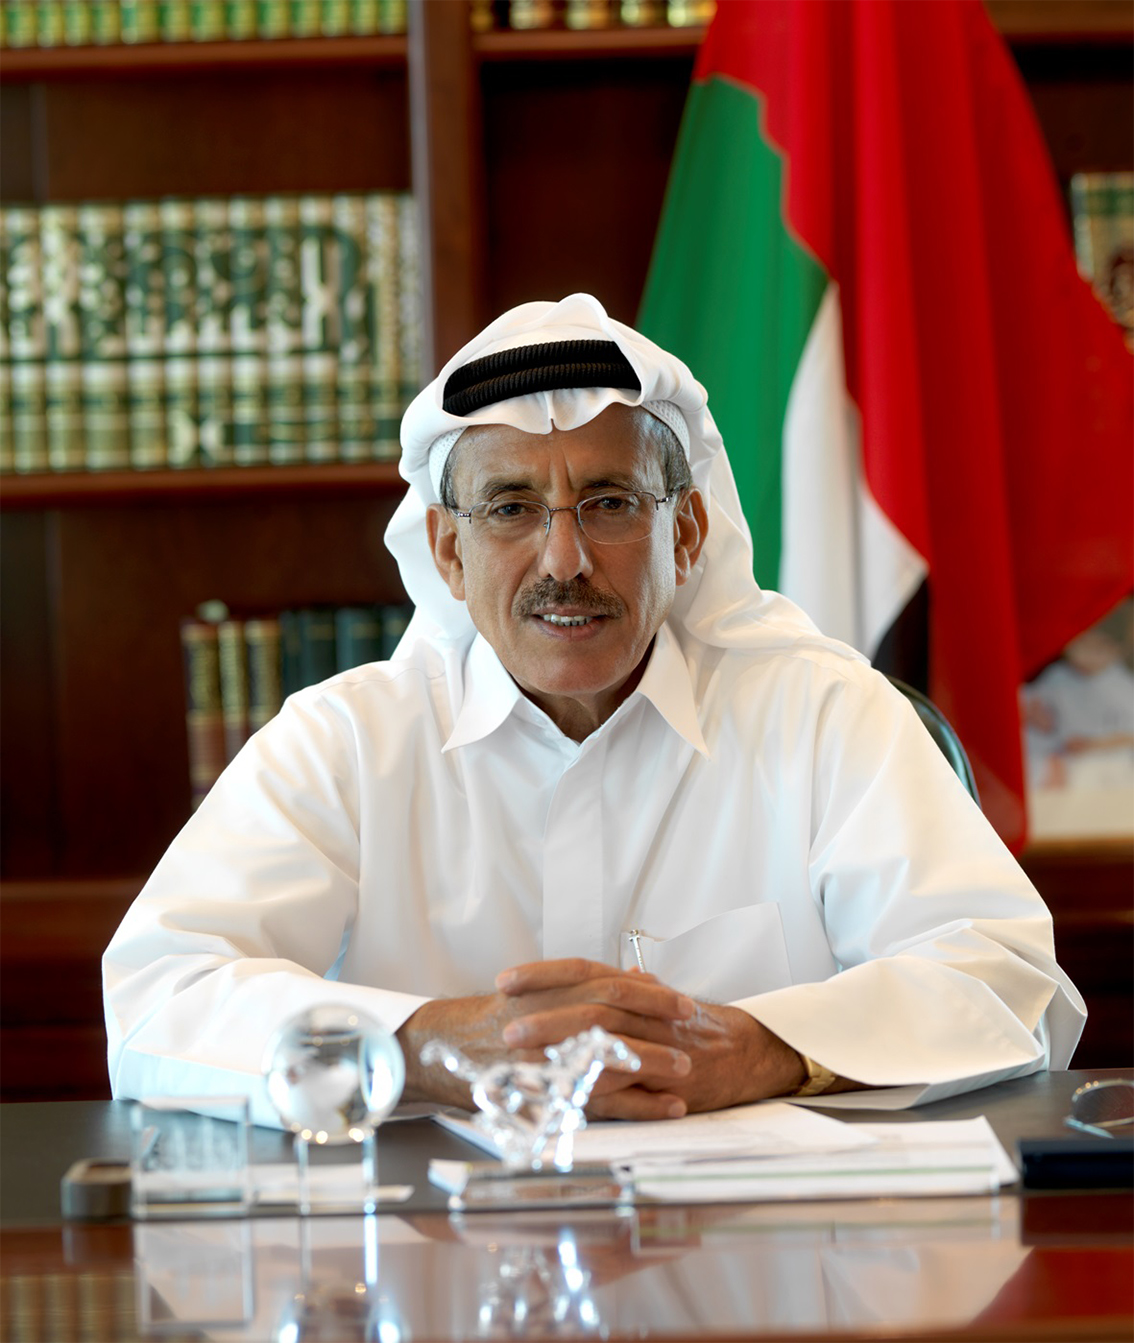 Al Habtoor Group reports strong first half, recording 19 per cent revenue growth in 2022 over 2021